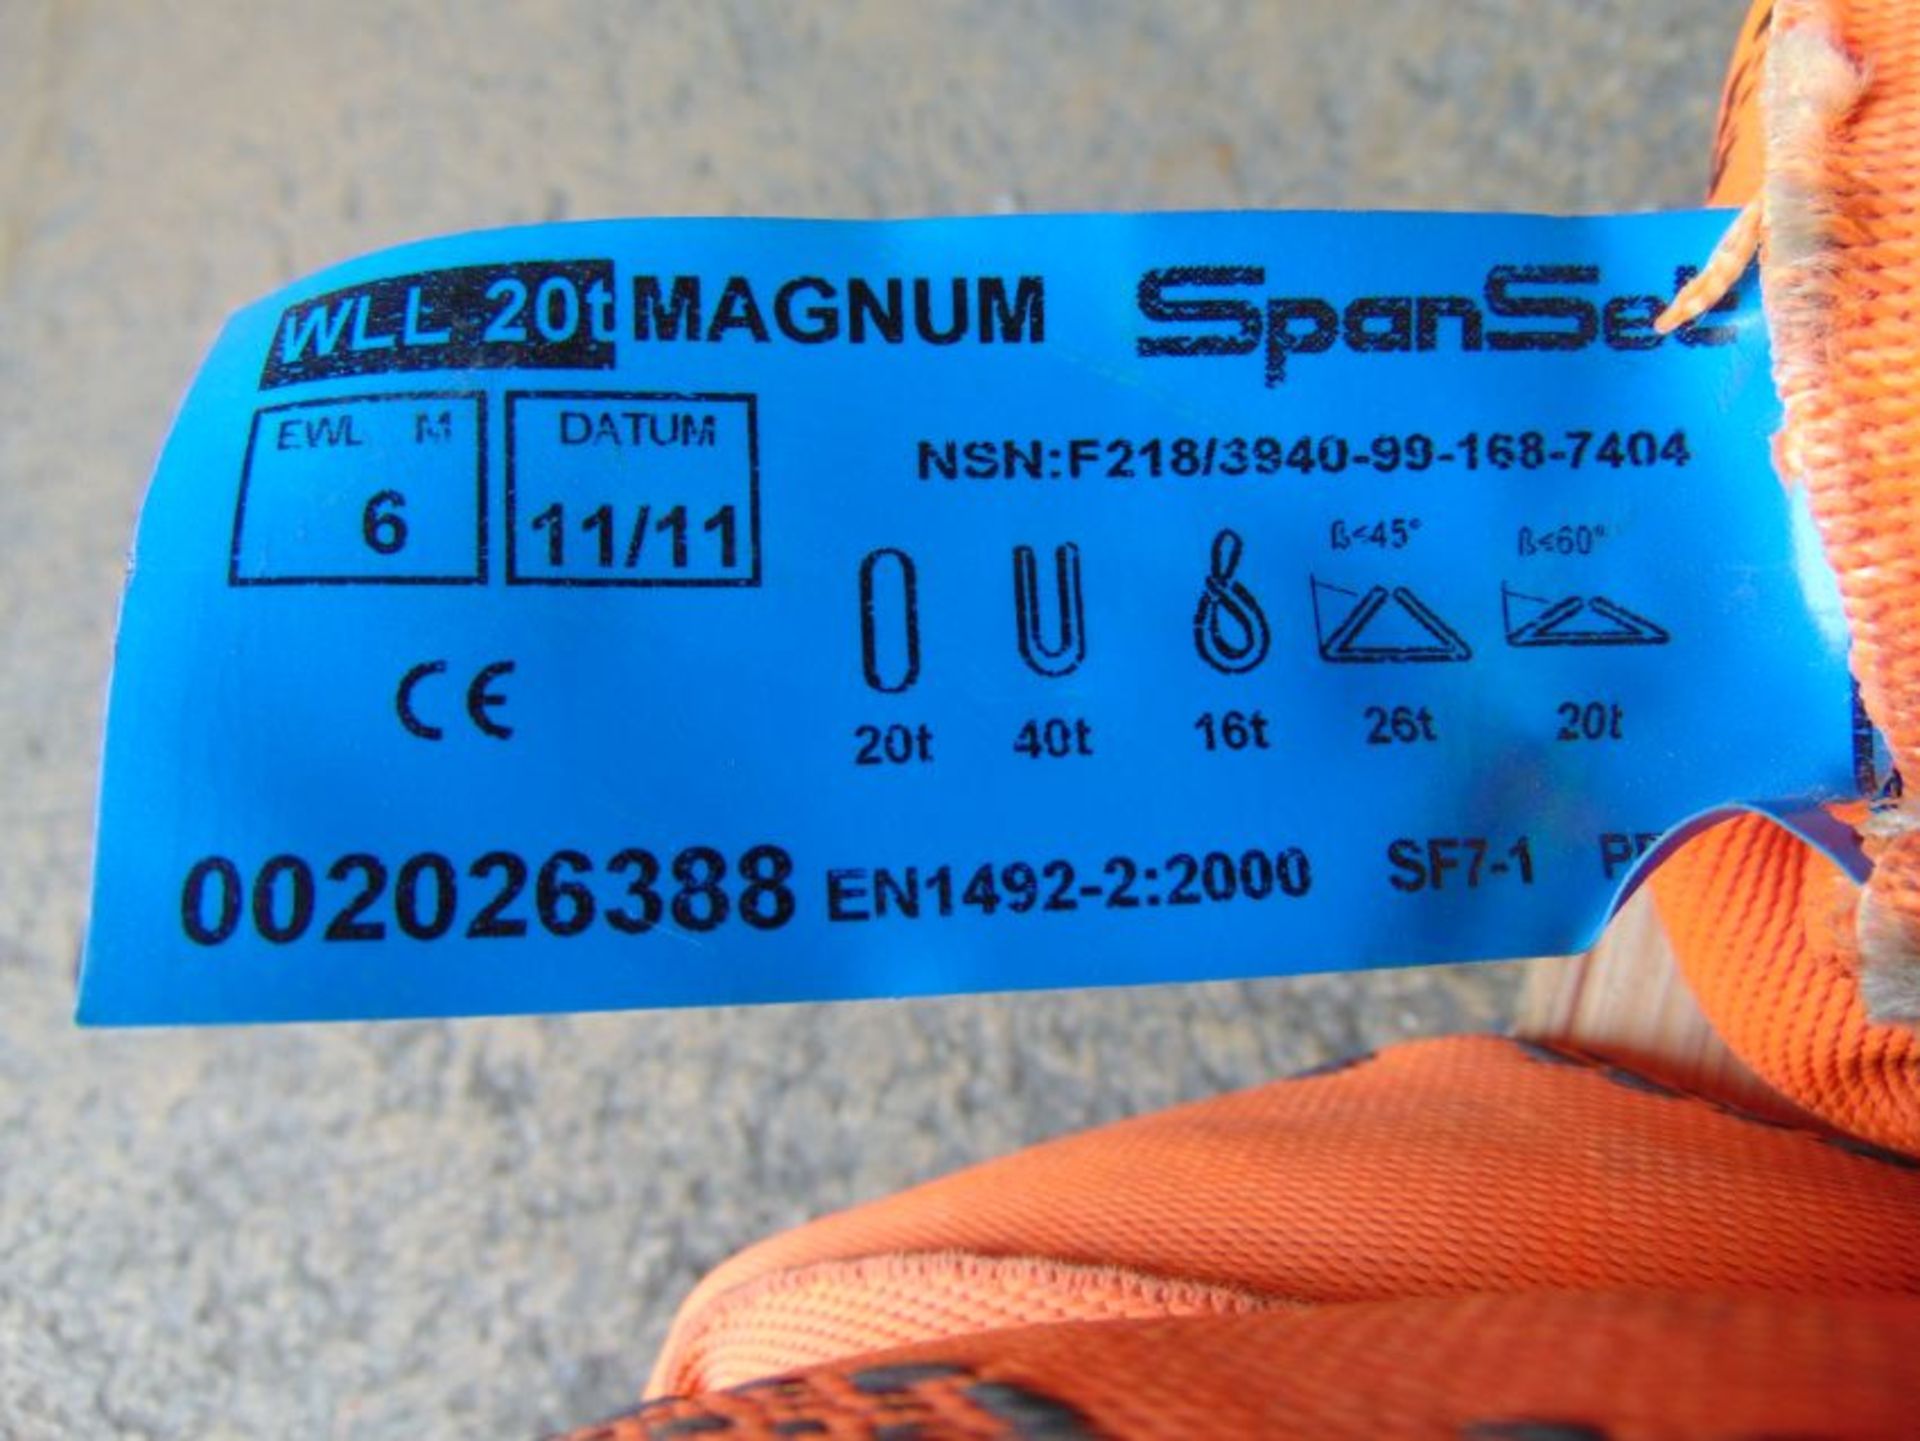 SpanSet Magnum 20,000kgs Round Sling - Image 3 of 3